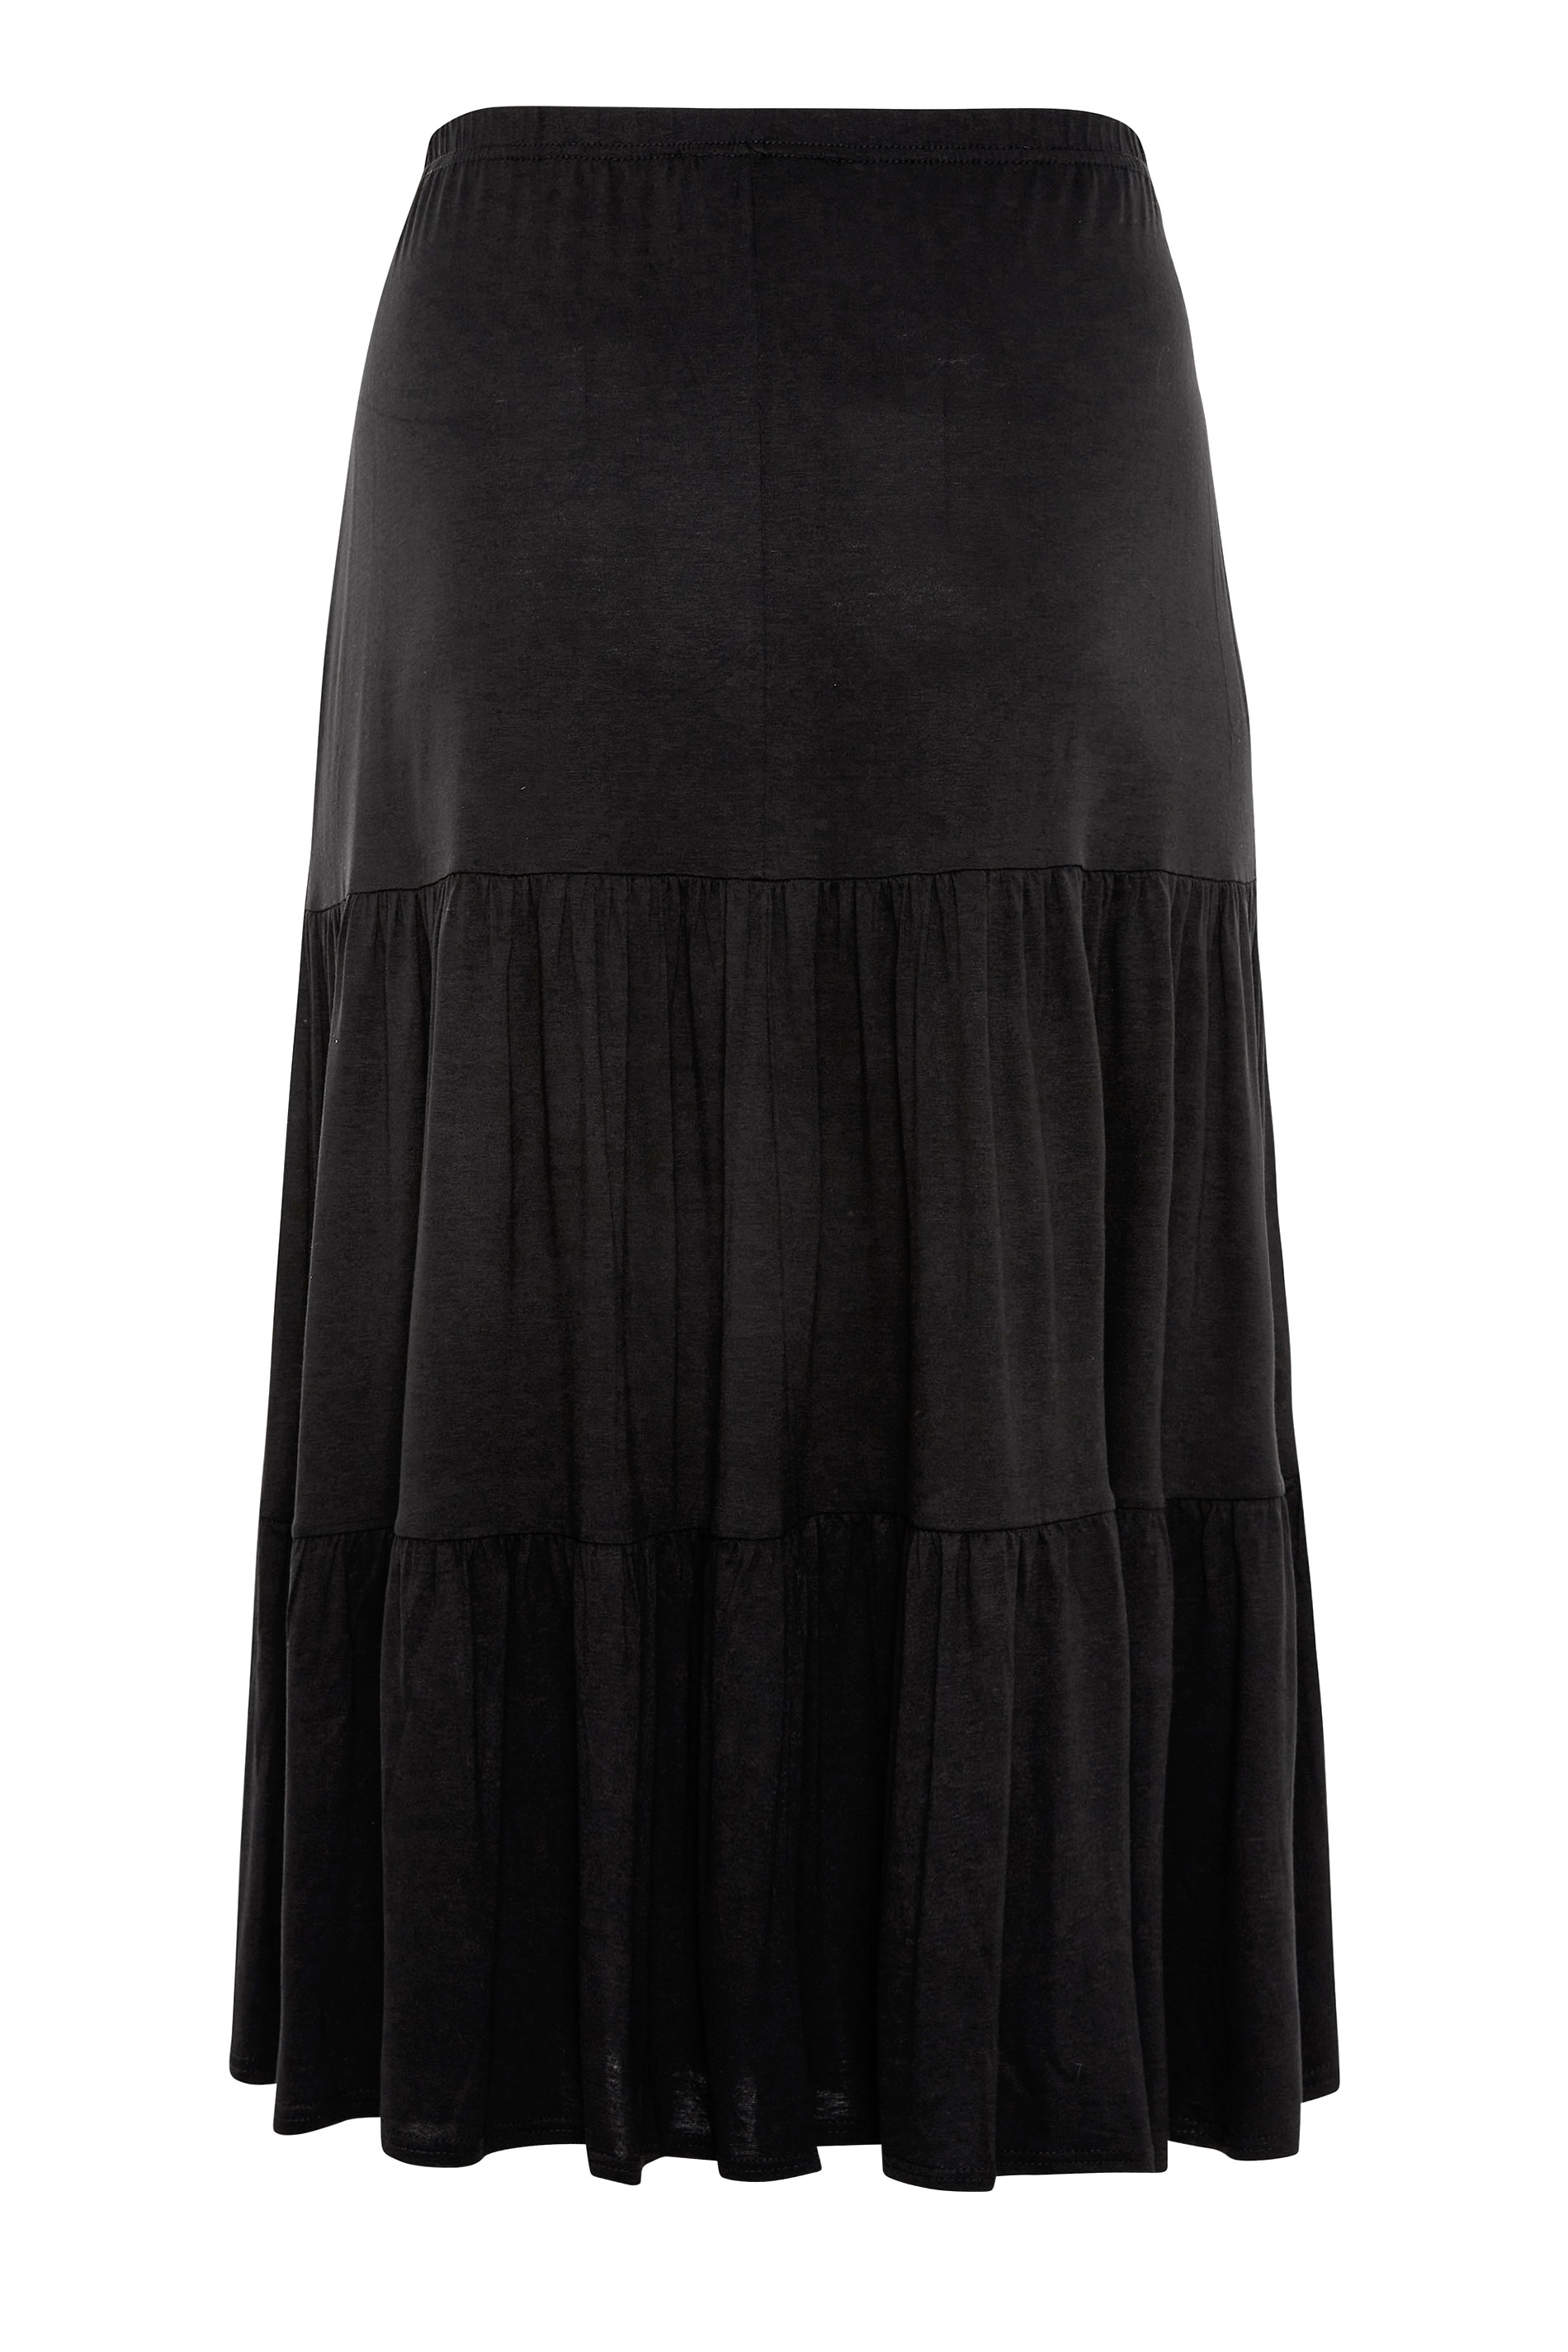 Plus Size Black Jersey Tiered Maxi Skirt | Yours Clothing